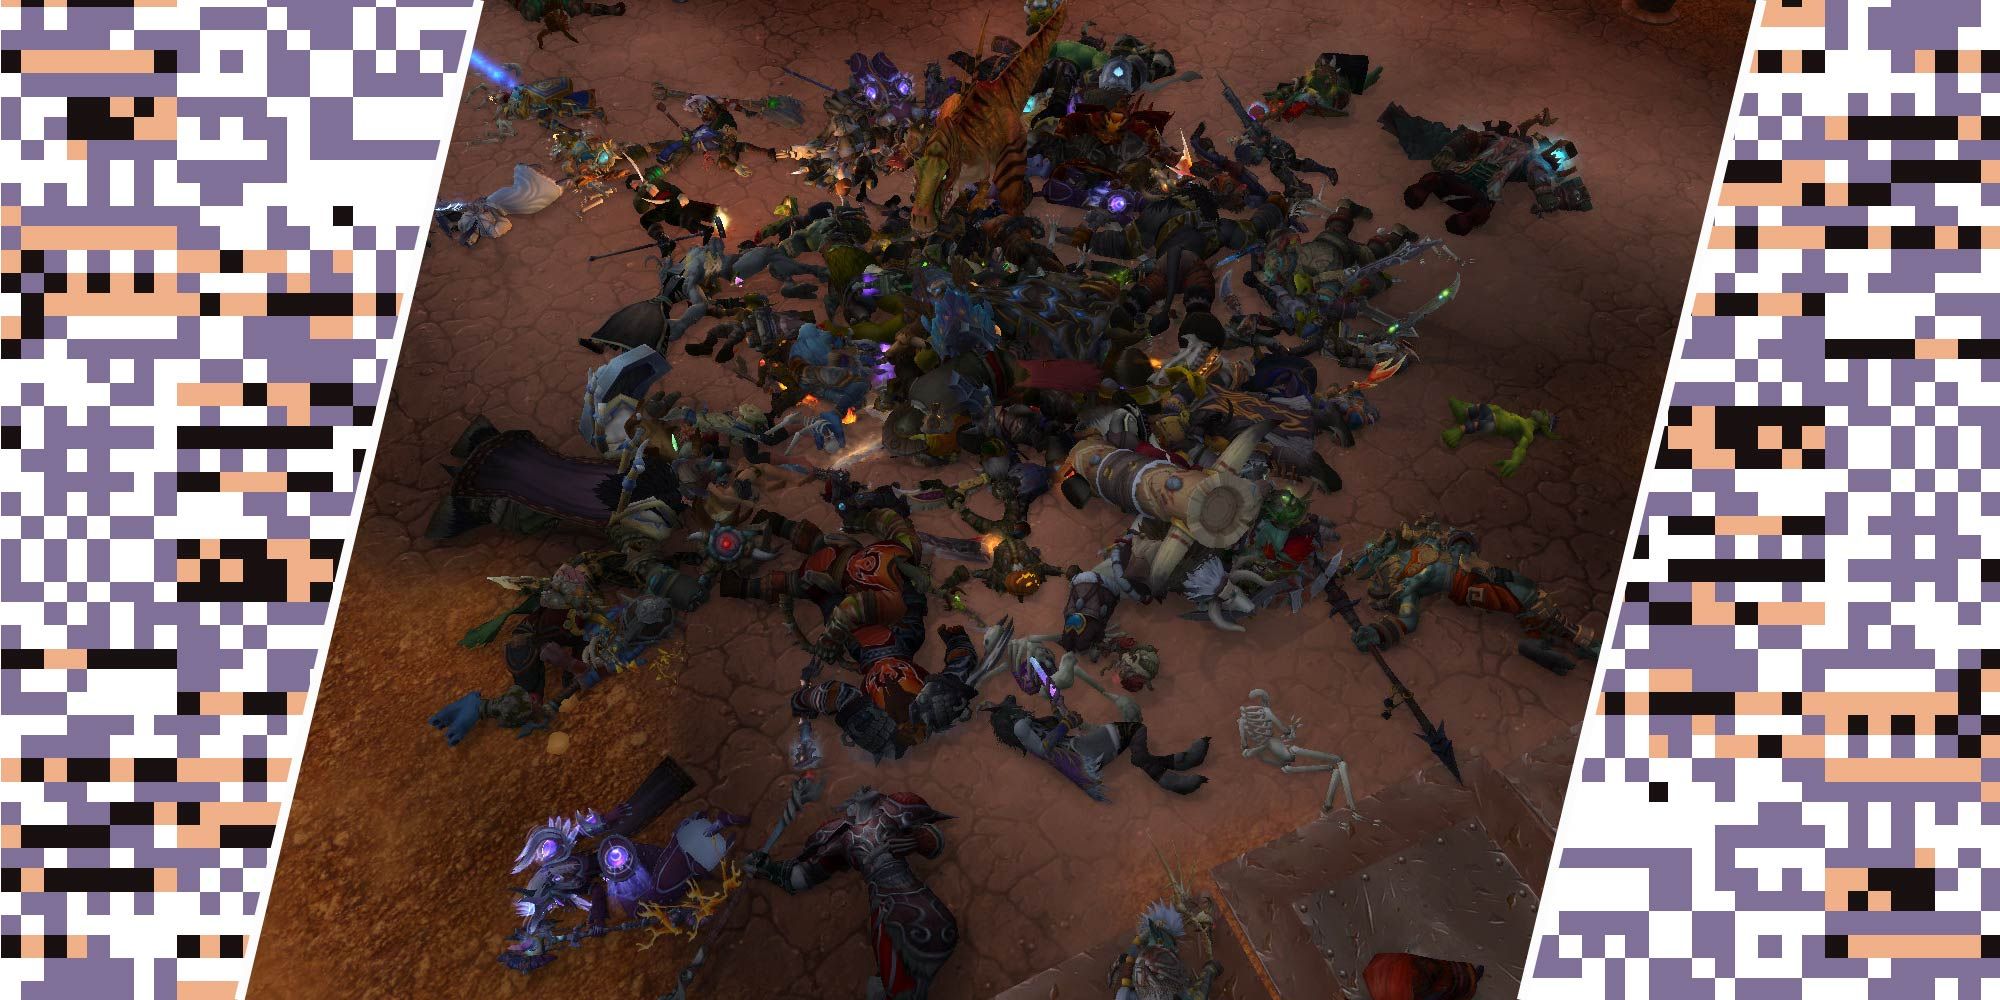 A split image featuring a pile of corpses in World of Warcraft in the middle, and Missingno on either side.